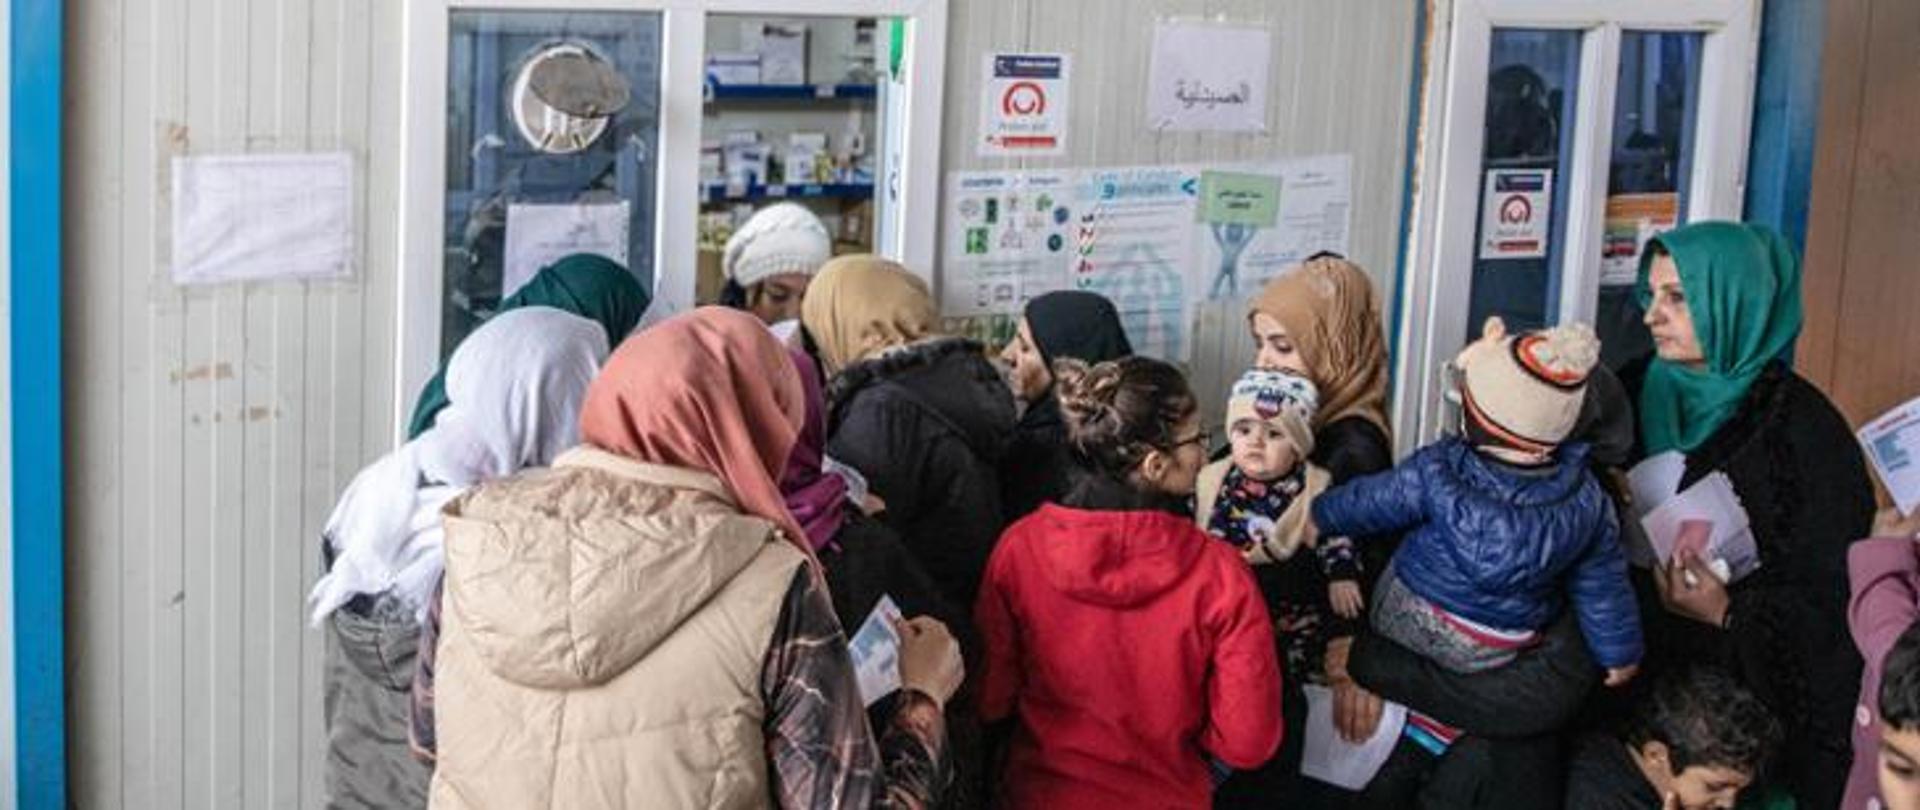 Supporting the development of basic medical care and immediate assistance, improving hygiene conditions and medical education for refugees, IDPs and local community in the Diyala province
